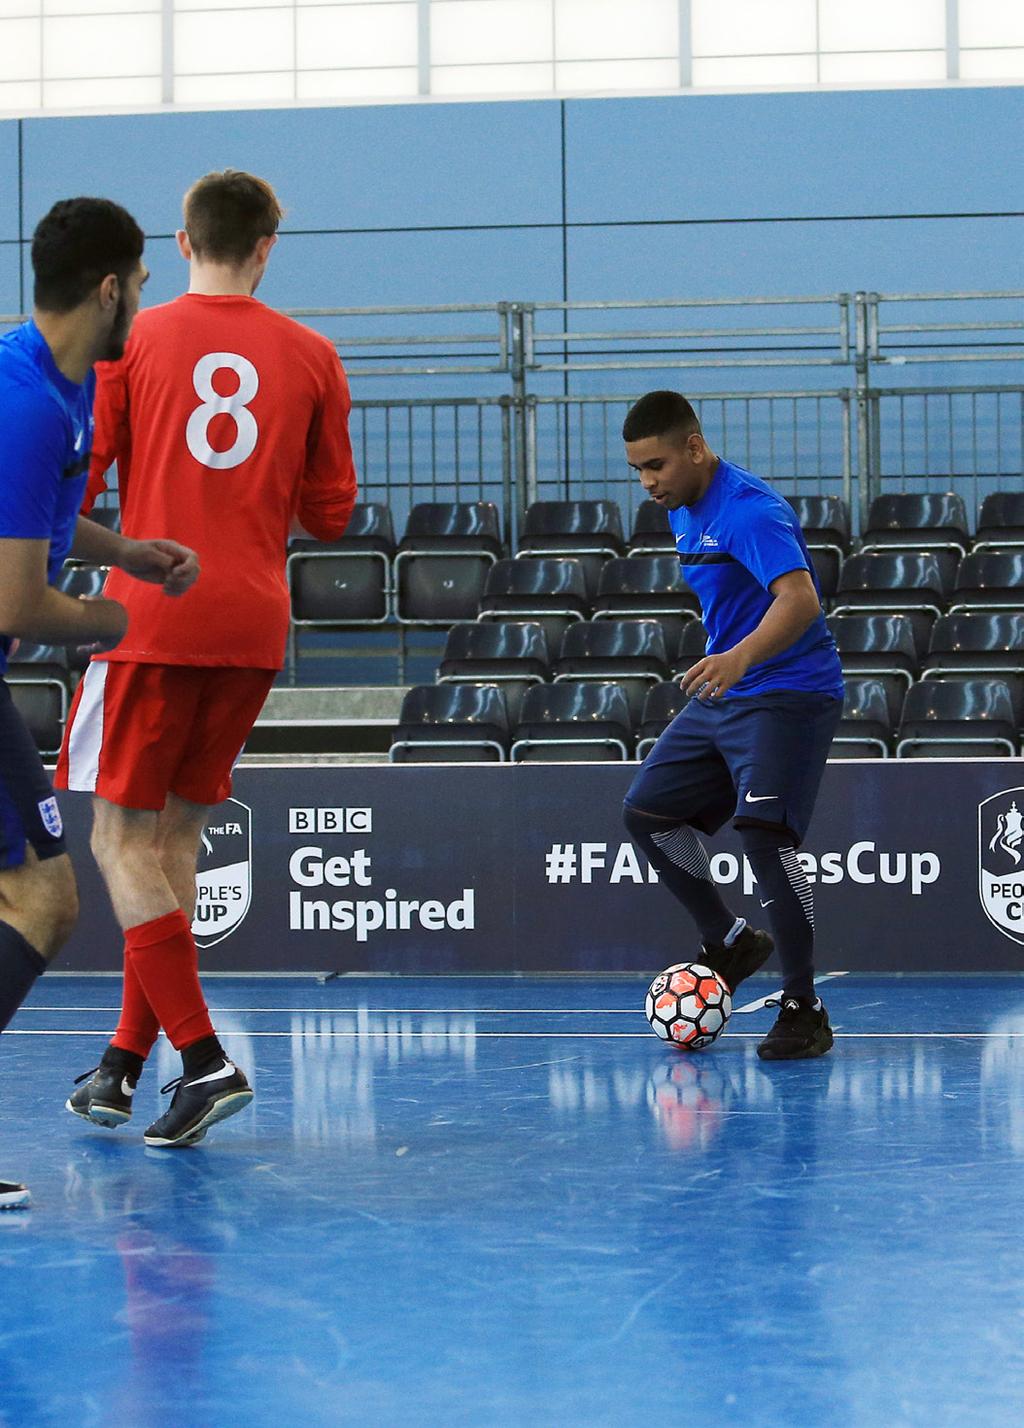 This approach has been adopted by the Premier League Academies, where from January through to March the academies arrange friendly Futsal fixtures and tournaments at a range of different